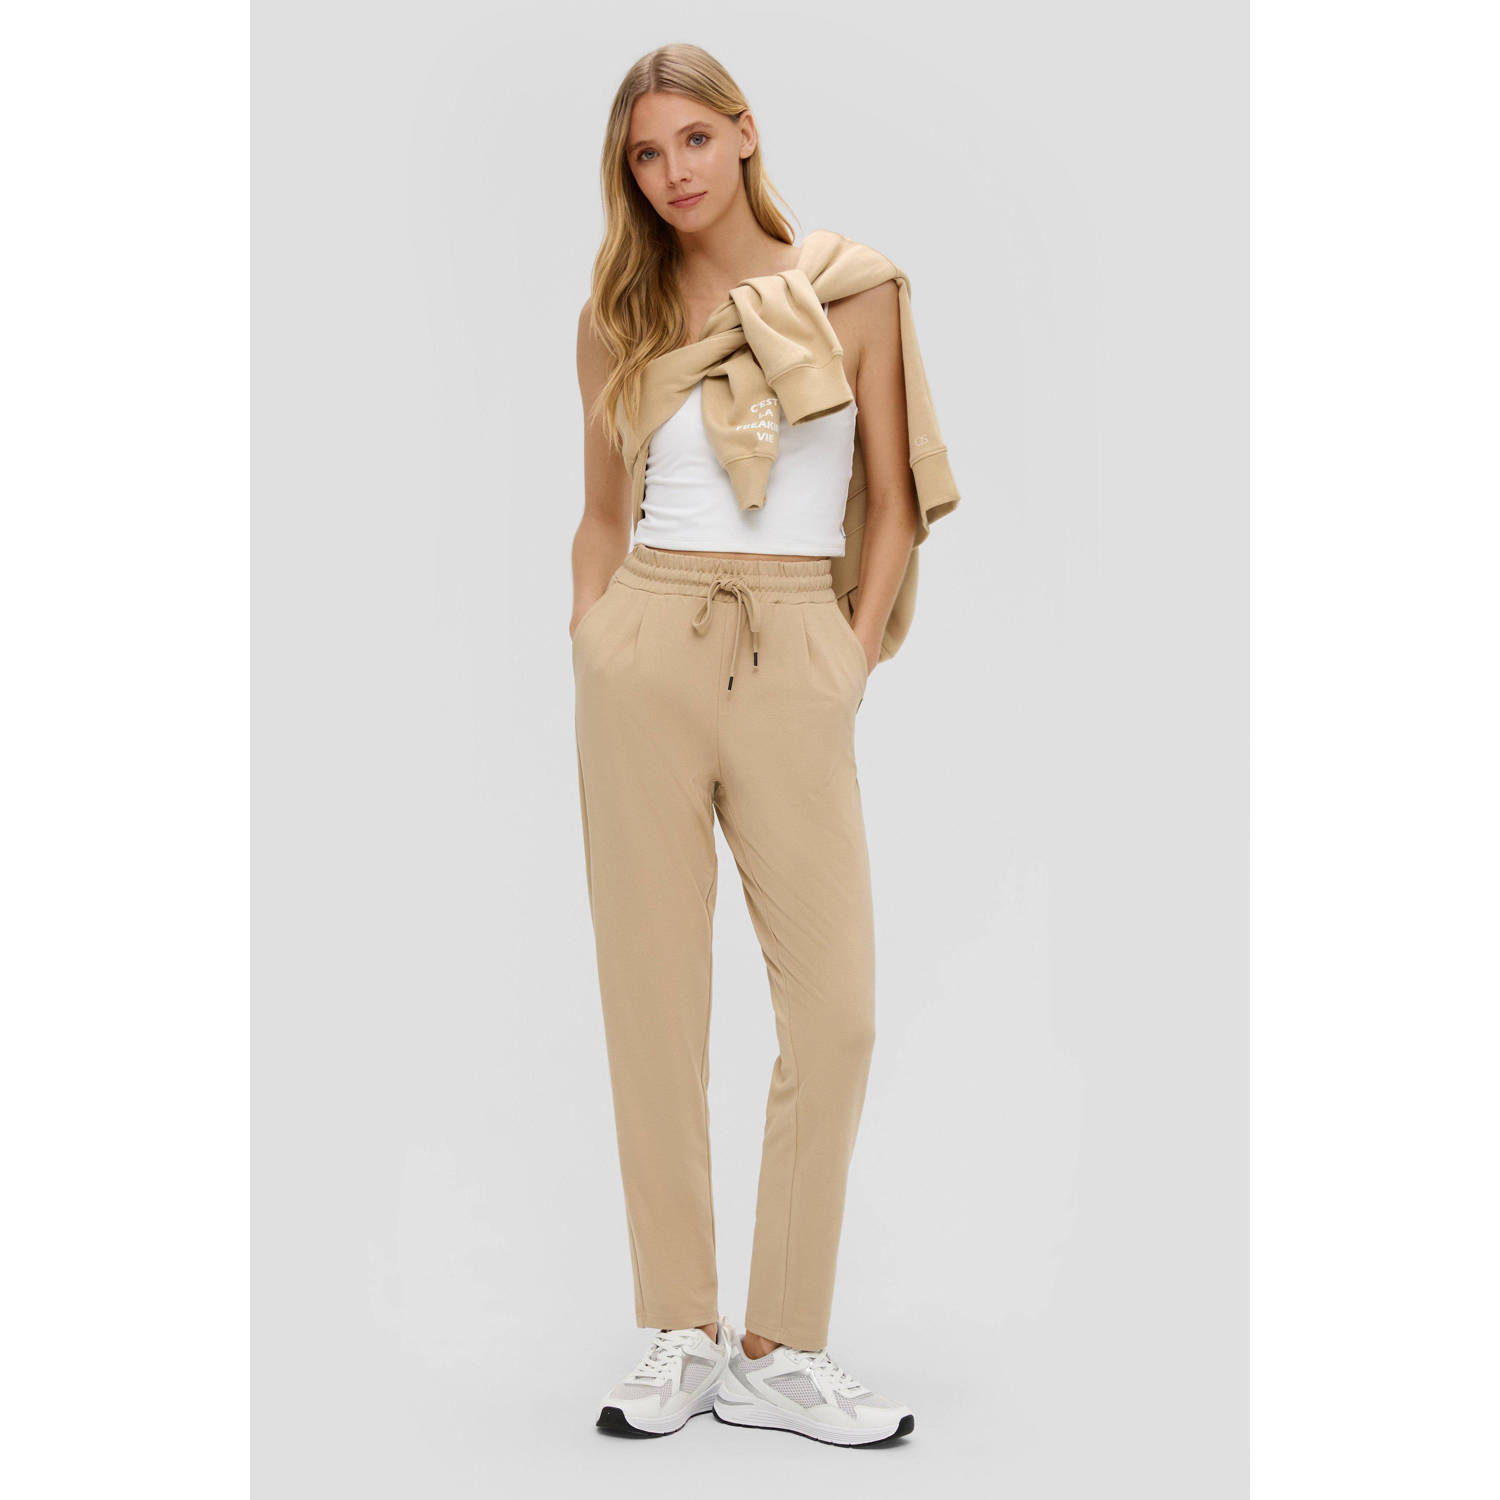 Q S by s.Oliver tapered fit broek beige